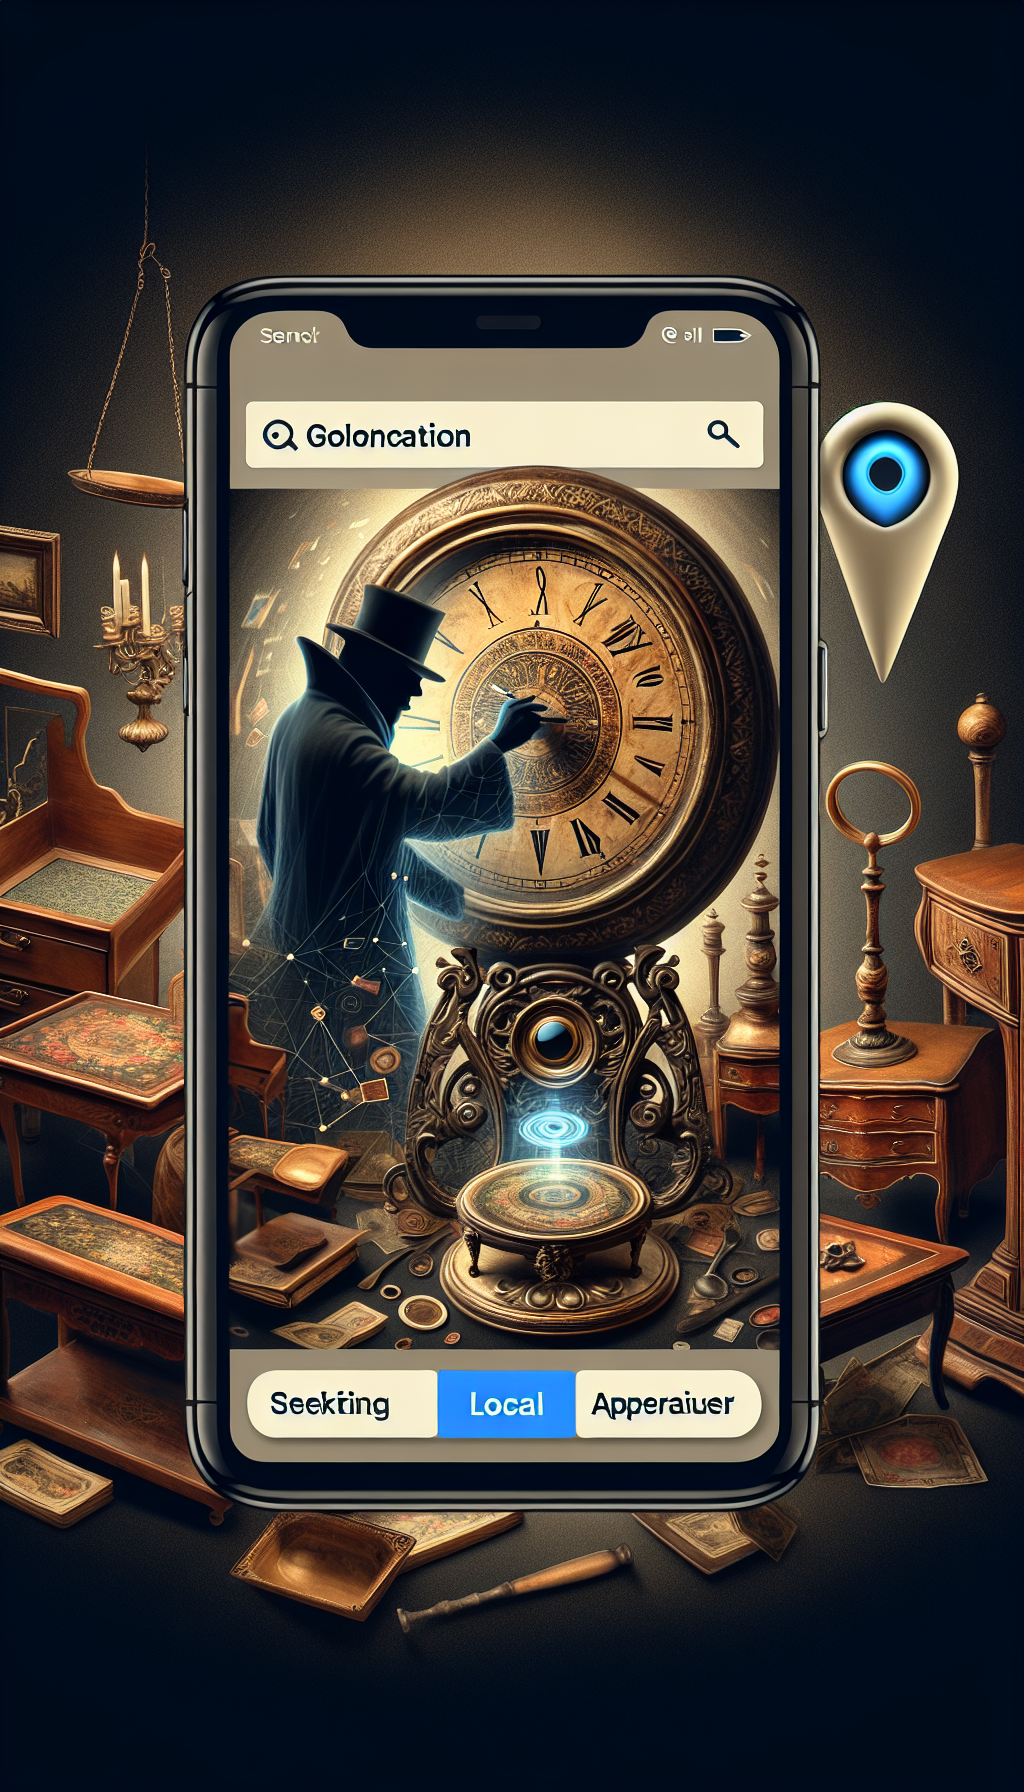 A whimsical illustration depicts an antique clock with its hands spinning backwards, nestled amidst a variety of classic furniture pieces. A magnifying glass hovers above, with a silhouetted appraiser peering through, hinting at discovery. The image is framed by a smartphone screen with a map pinpointing the appraiser's location, blending vintage charm with the modern search for "antique furniture appraiser near me."